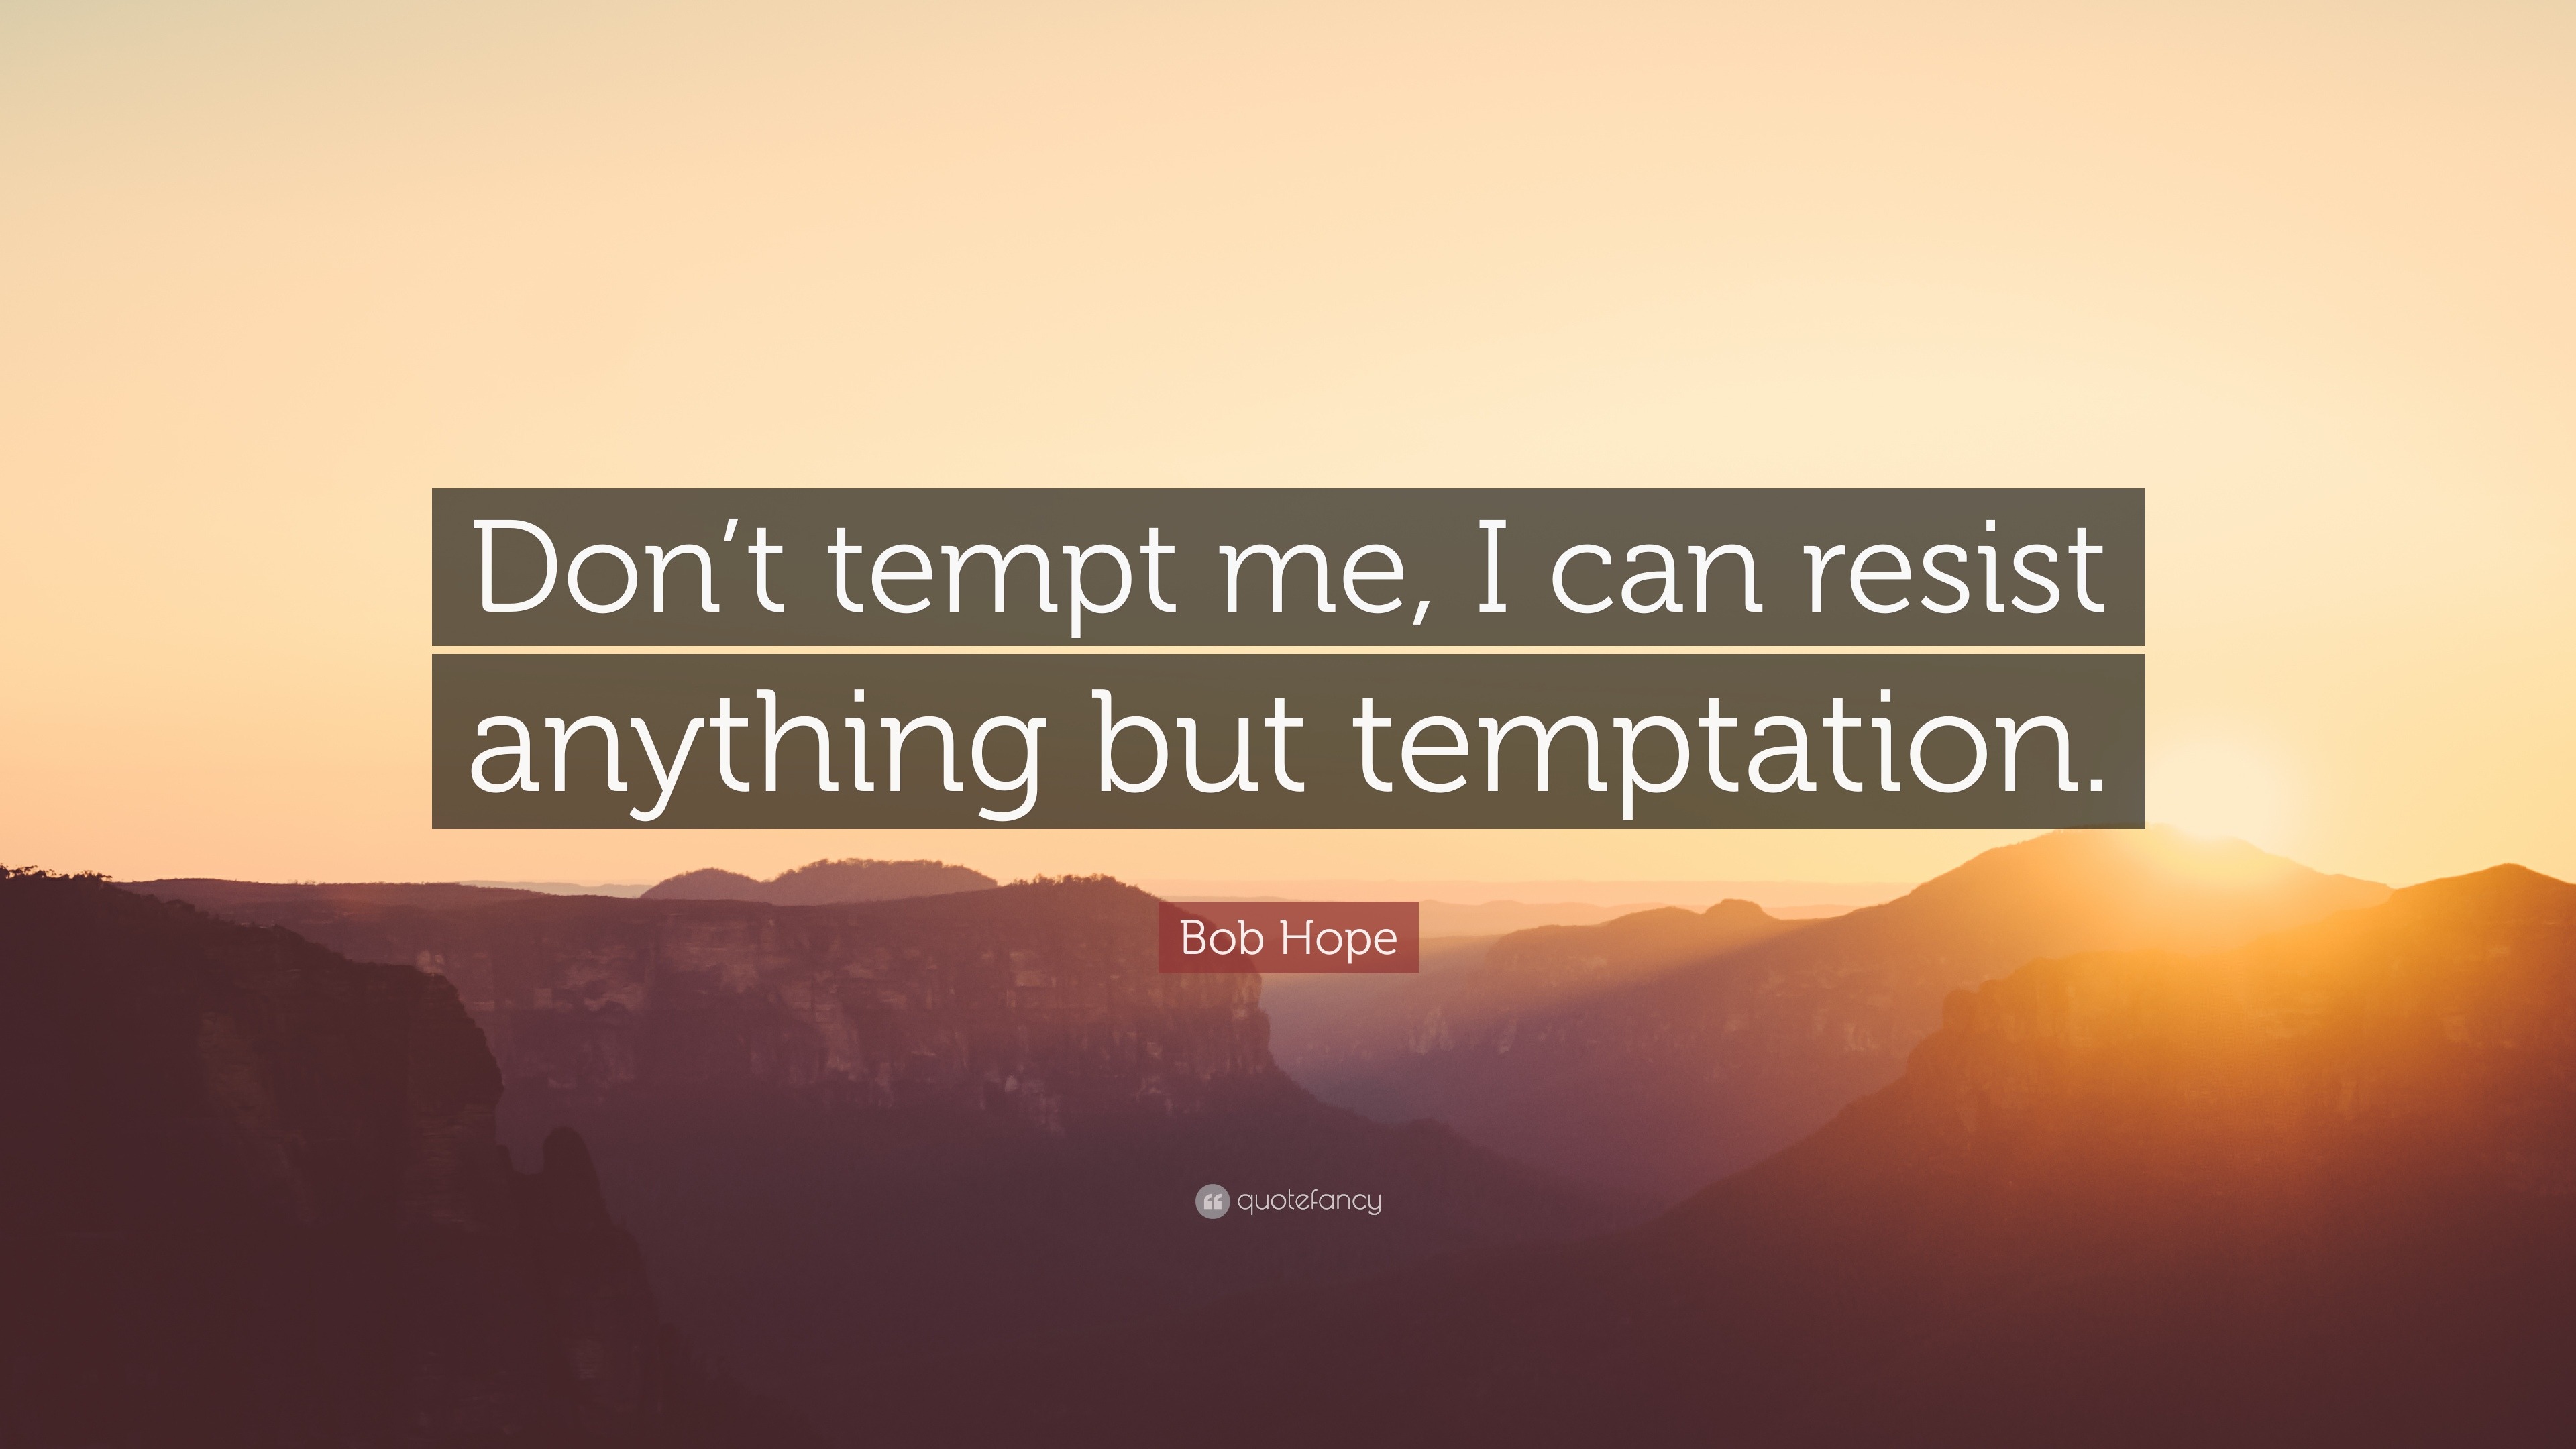 https://quotefancy.com/media/wallpaper/3840x2160/655743-Bob-Hope-Quote-Don-t-tempt-me-I-can-resist-anything-but-temptation.jpg